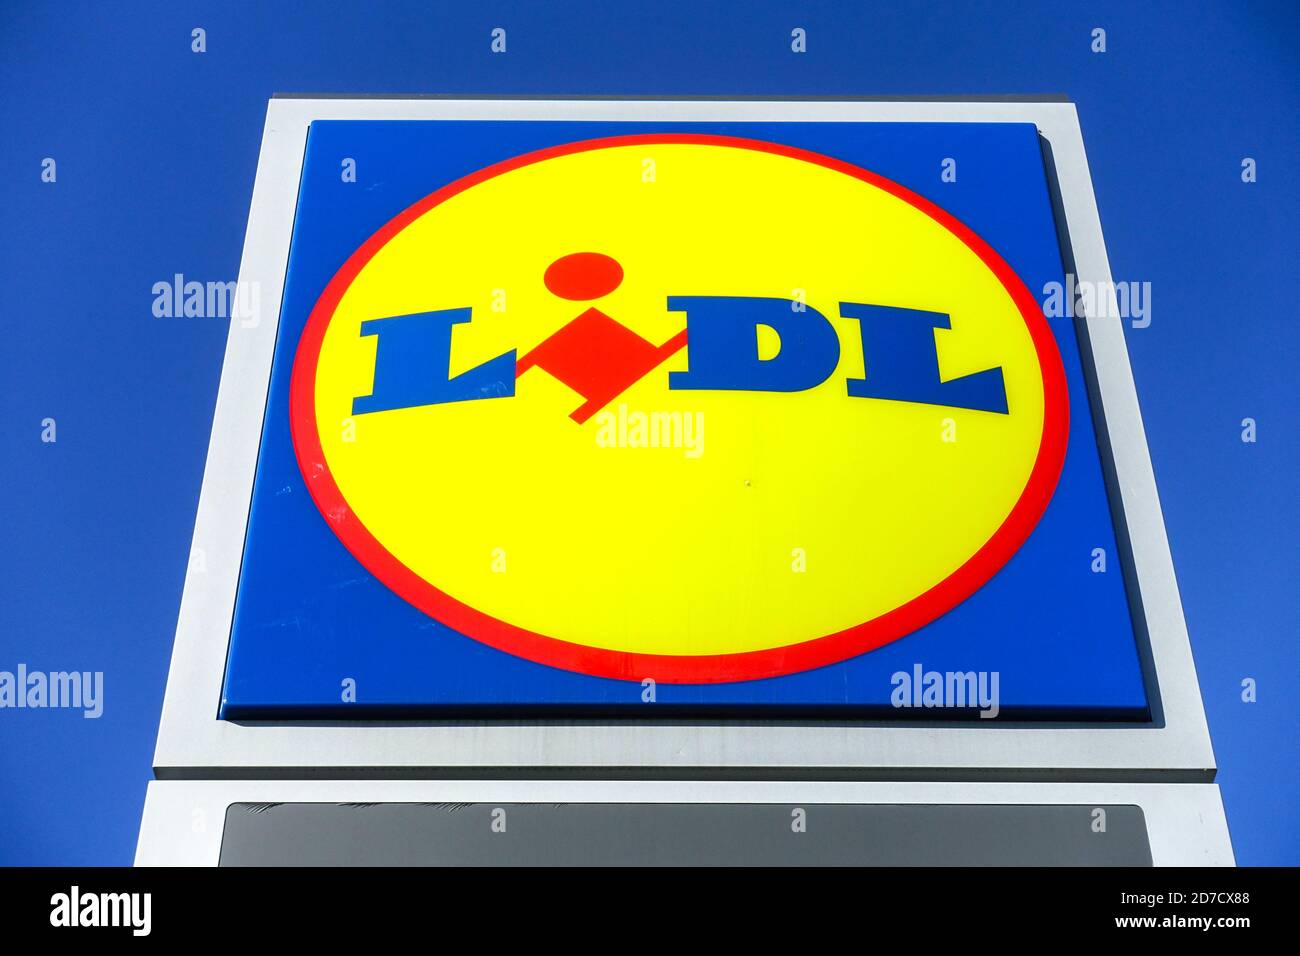 Stylish Shoes from the LIDL Brand Were Trendy among Young People. the LIDL  String S Stock Image - Image of products, discounts: 244612637